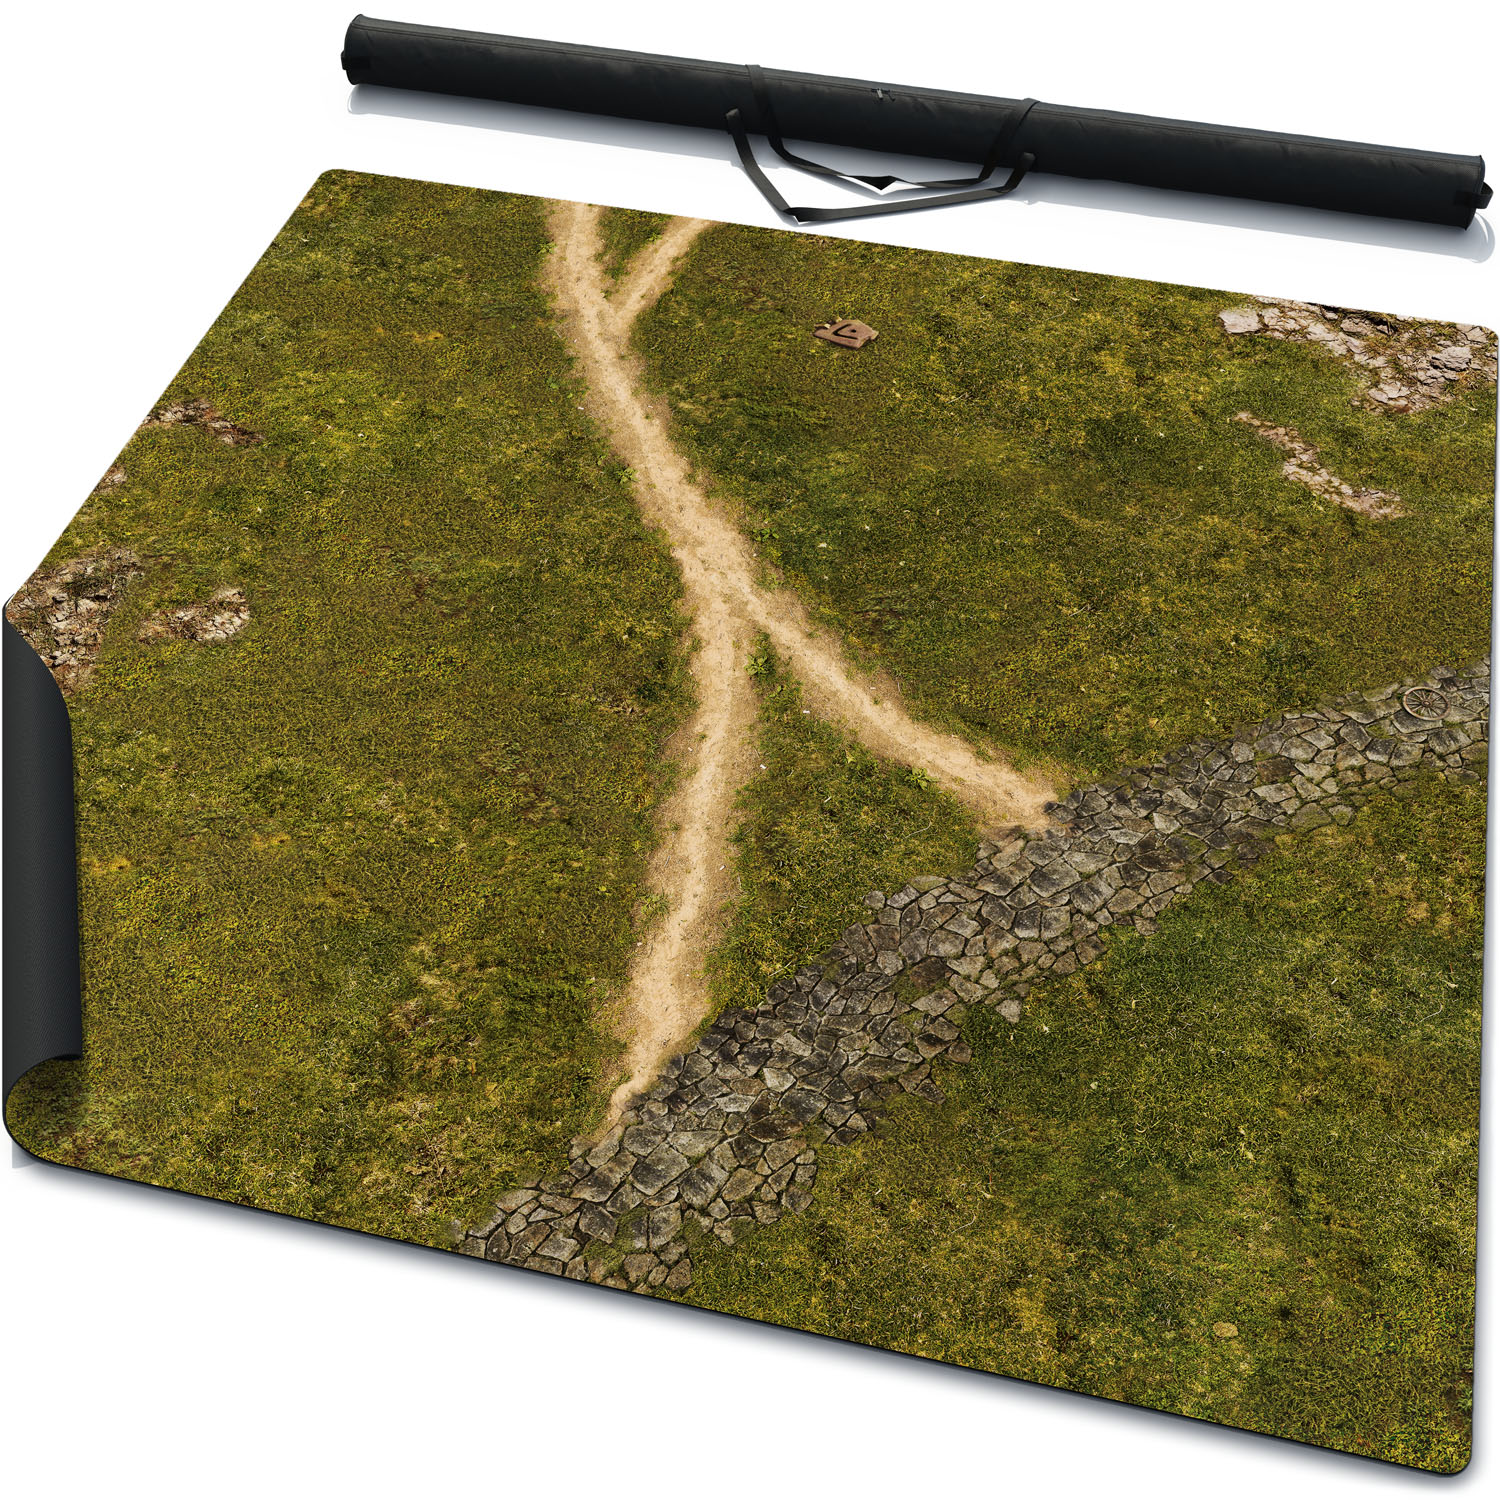 DESERT Gaming mat 72x48 for warhammer rubber mouse pad